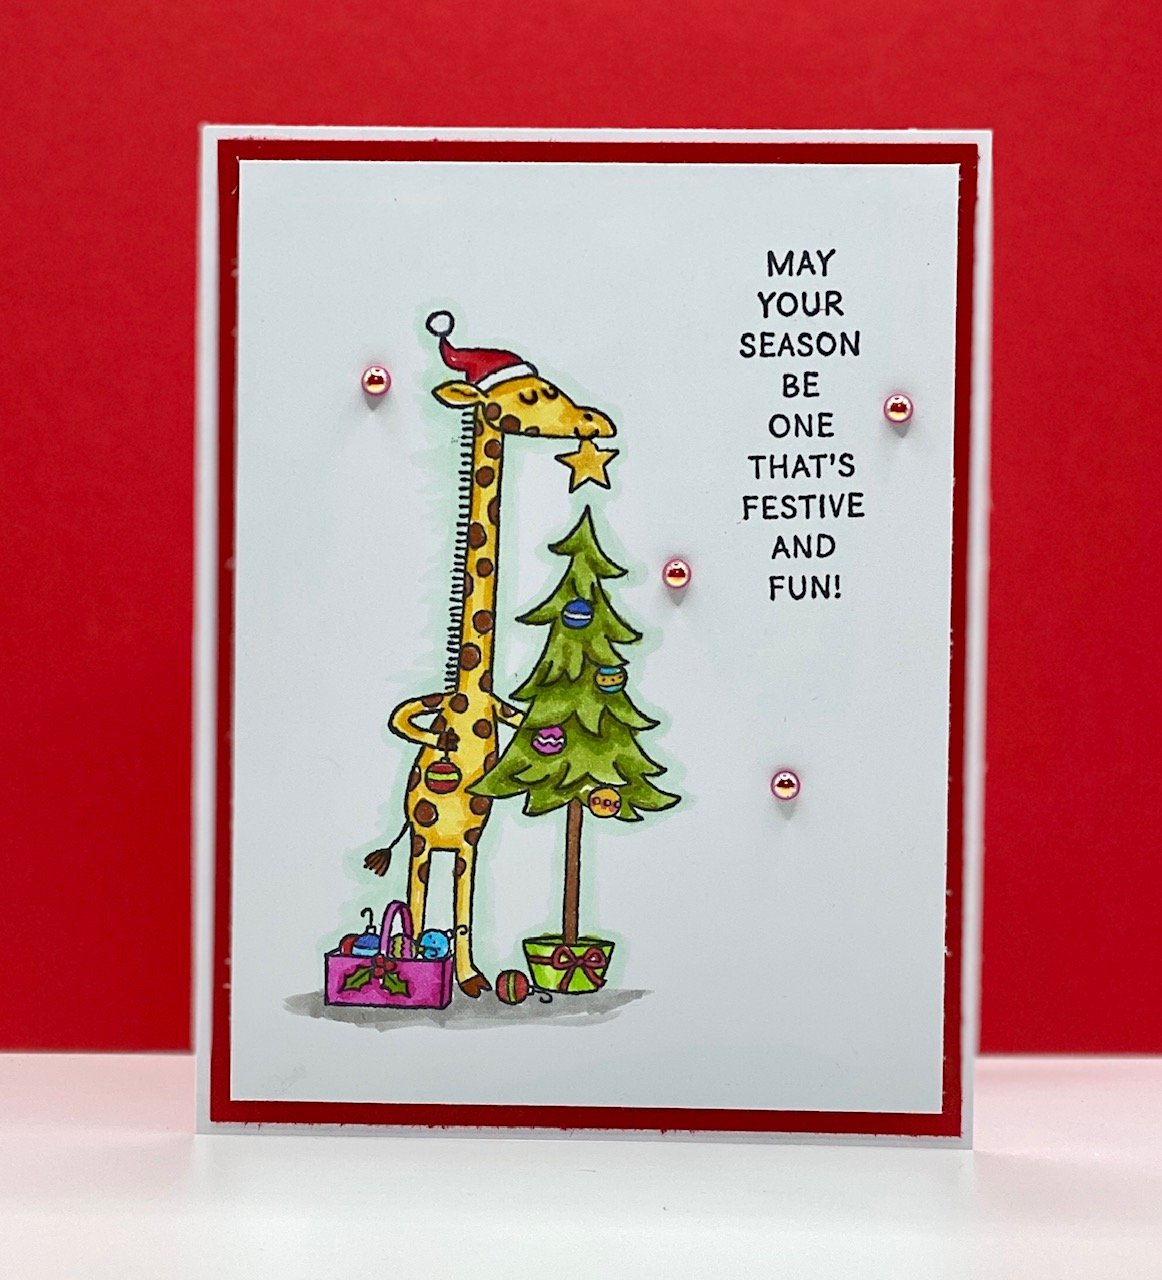 Stampin' Up!'s Festive & Fun stamps with giraffe and Christmas tree colored with many Stampin' Blends markers and white and red base papers